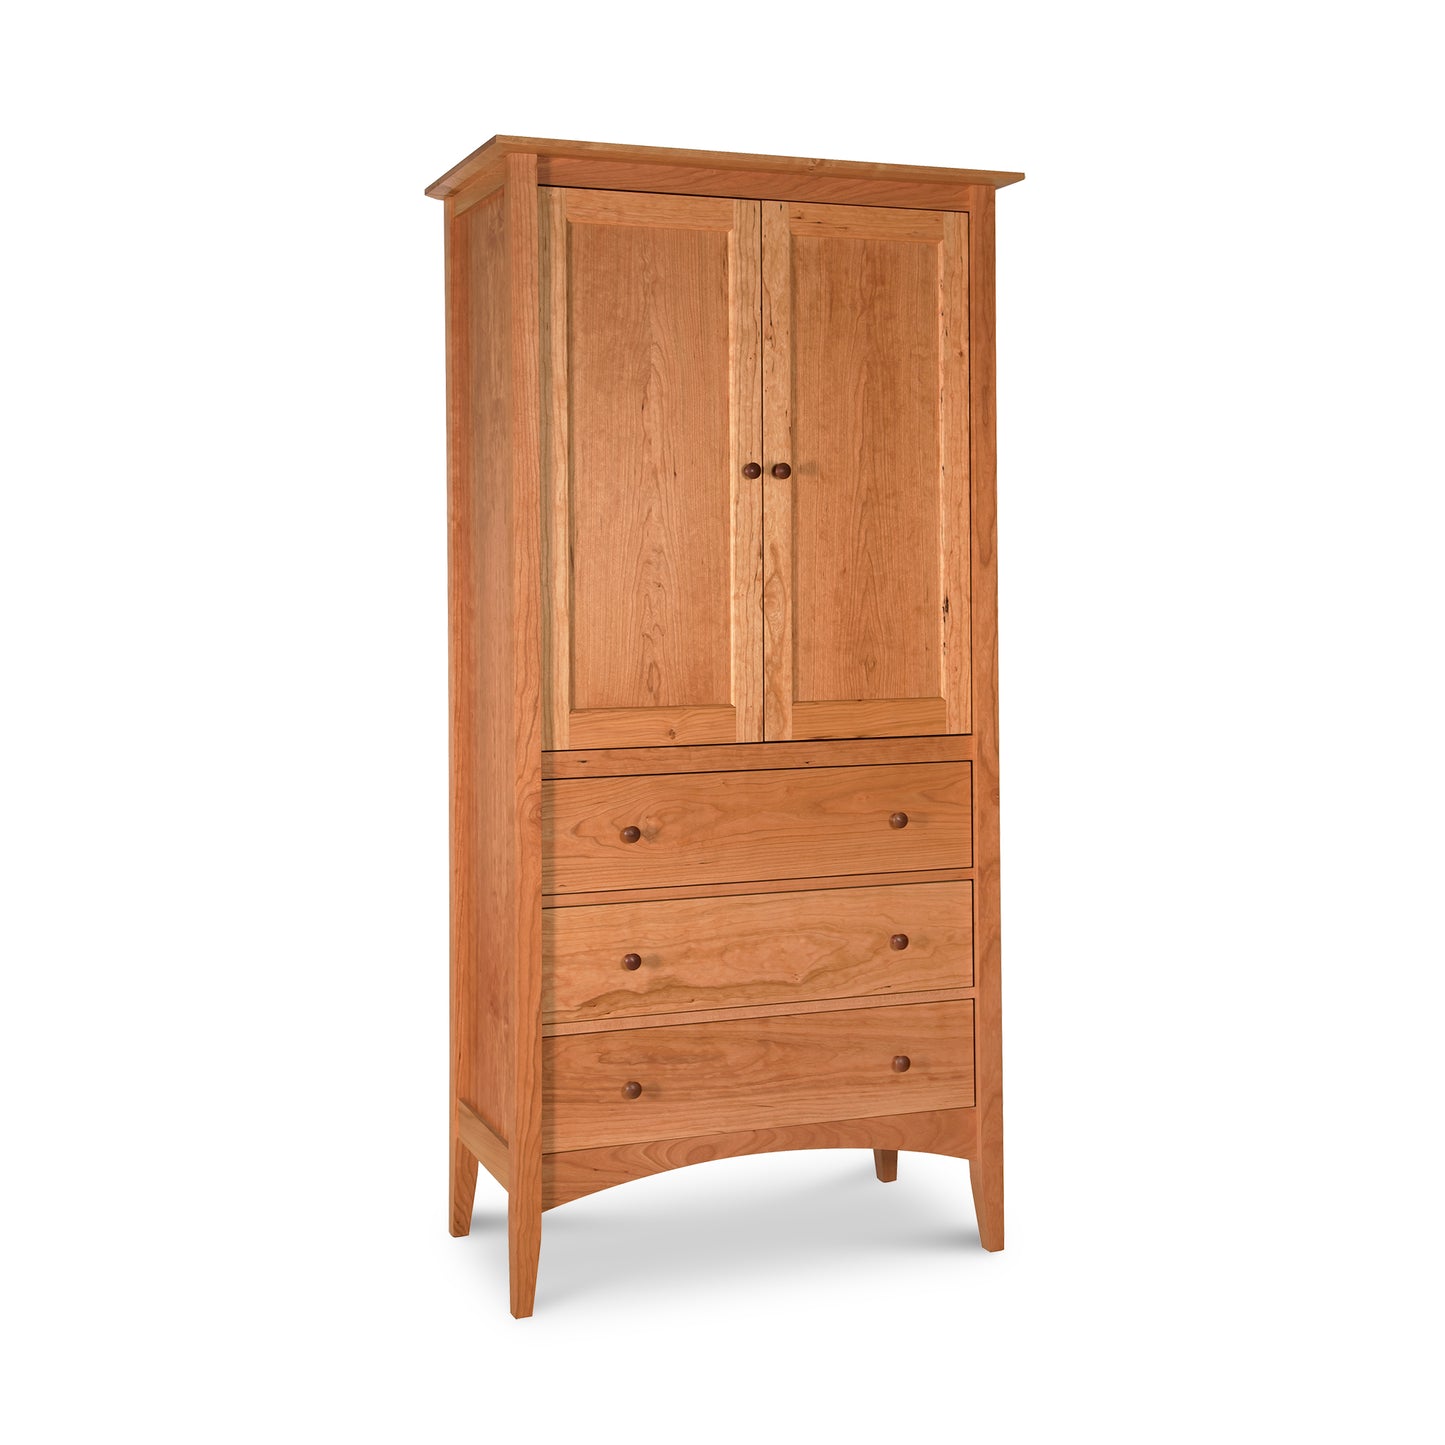 An American Shaker armoire by Maple Corner Woodworks made of solid wood with two drawers and two doors.